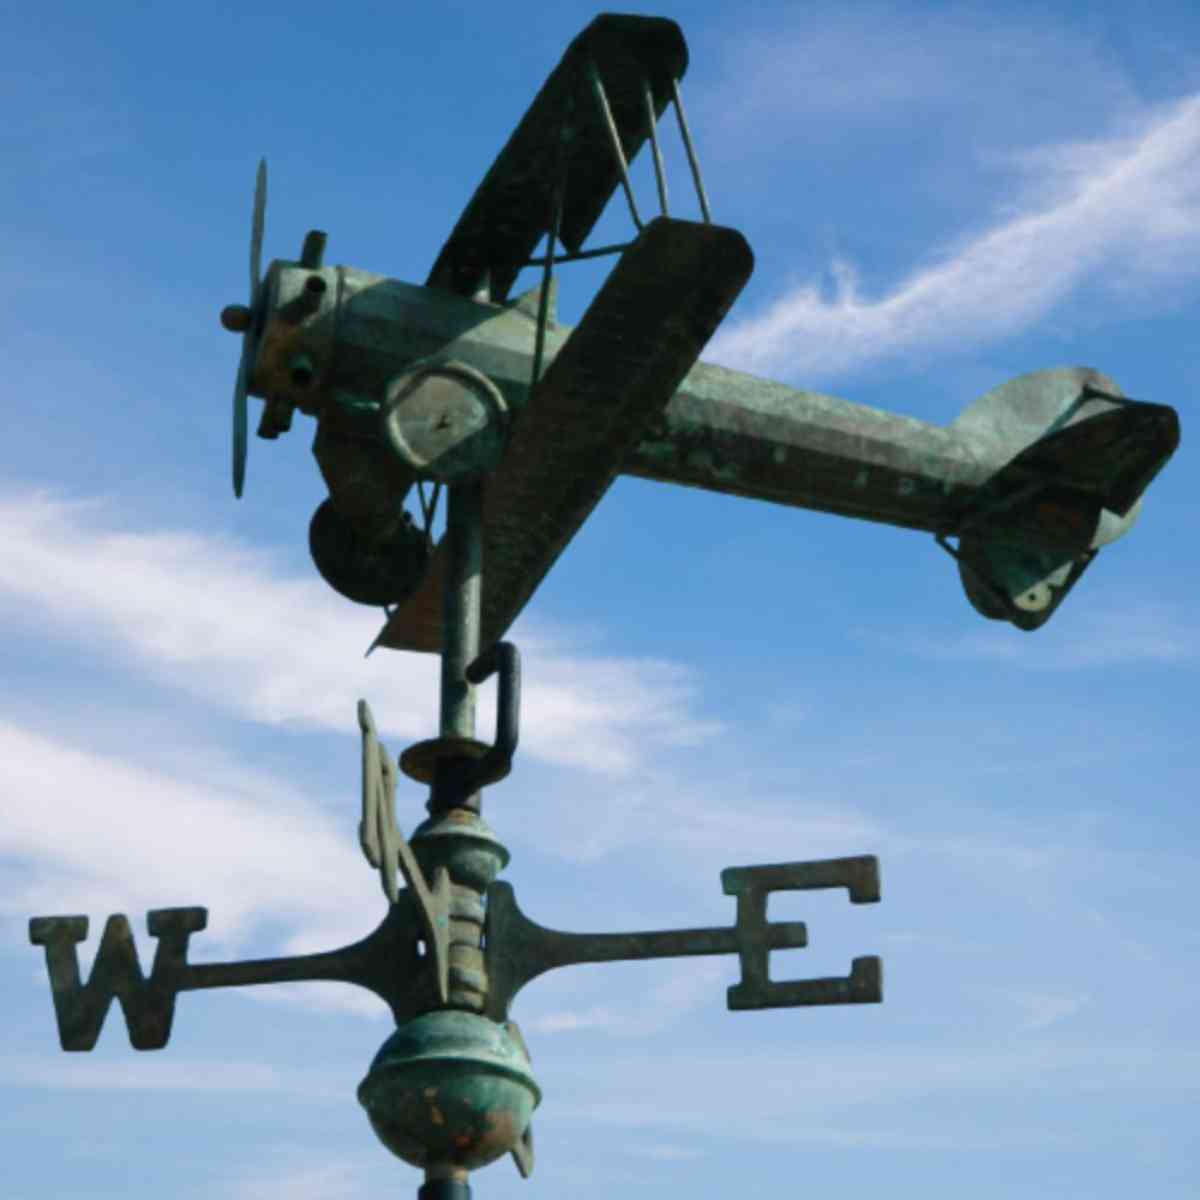 Aged_Copper_Cottage_Aircraft_Weathervane